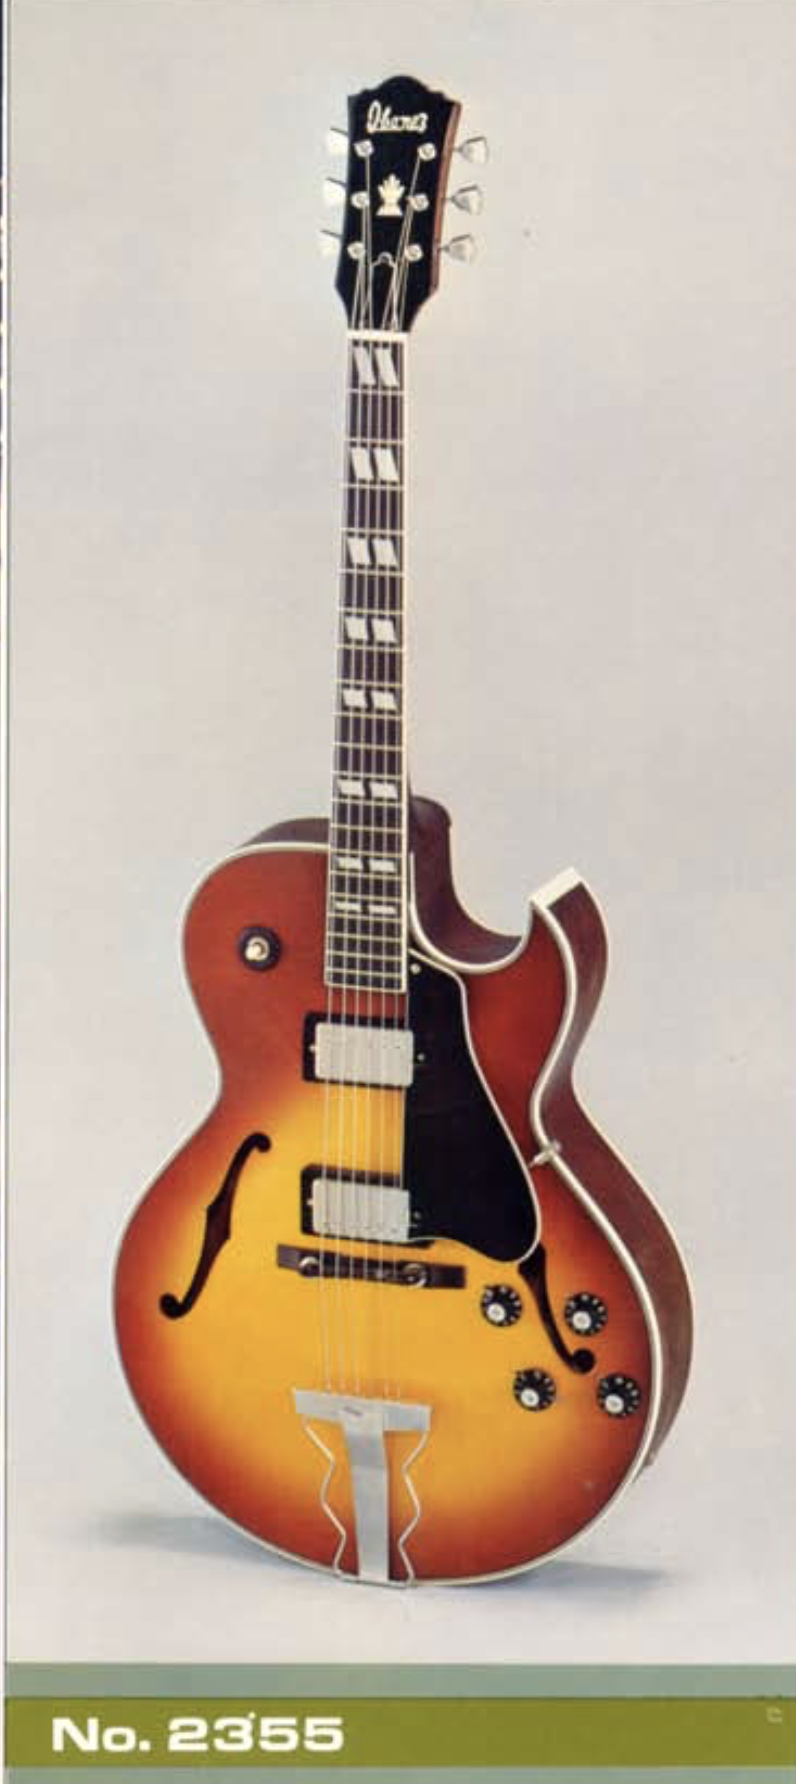 Why Isn't the Original Zigzag Gibson ES-175 Tailpiece Available?-screen-shot-2021-05-22-3-22-10-pm-png